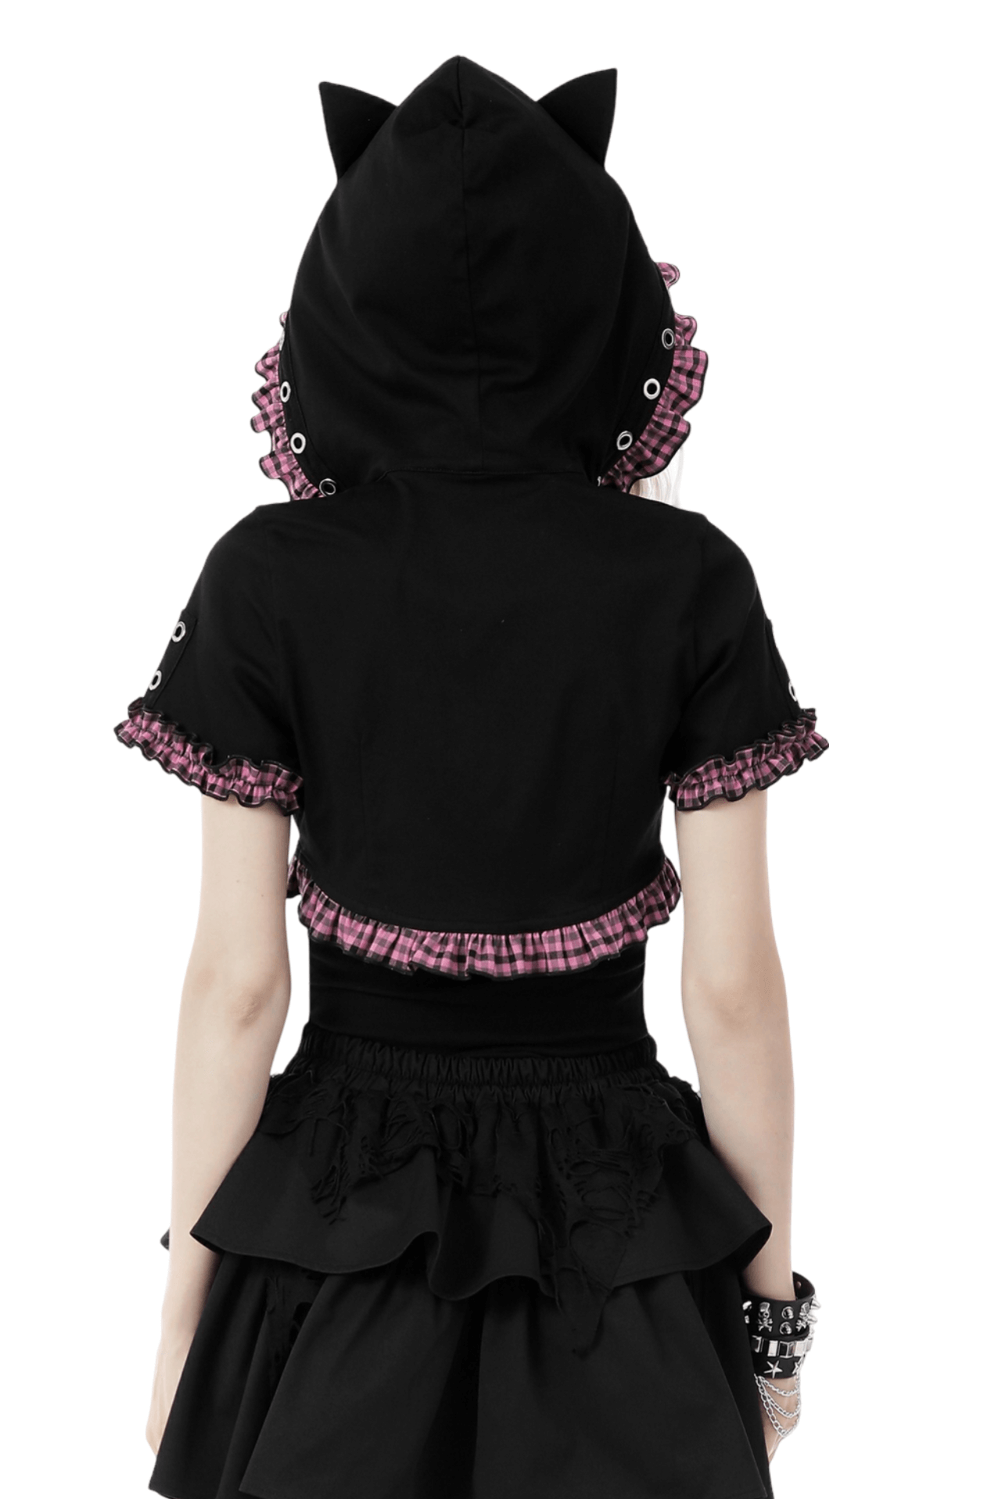 Gothic Black Cat Ear Crop Top with Pink Plaid and Hood